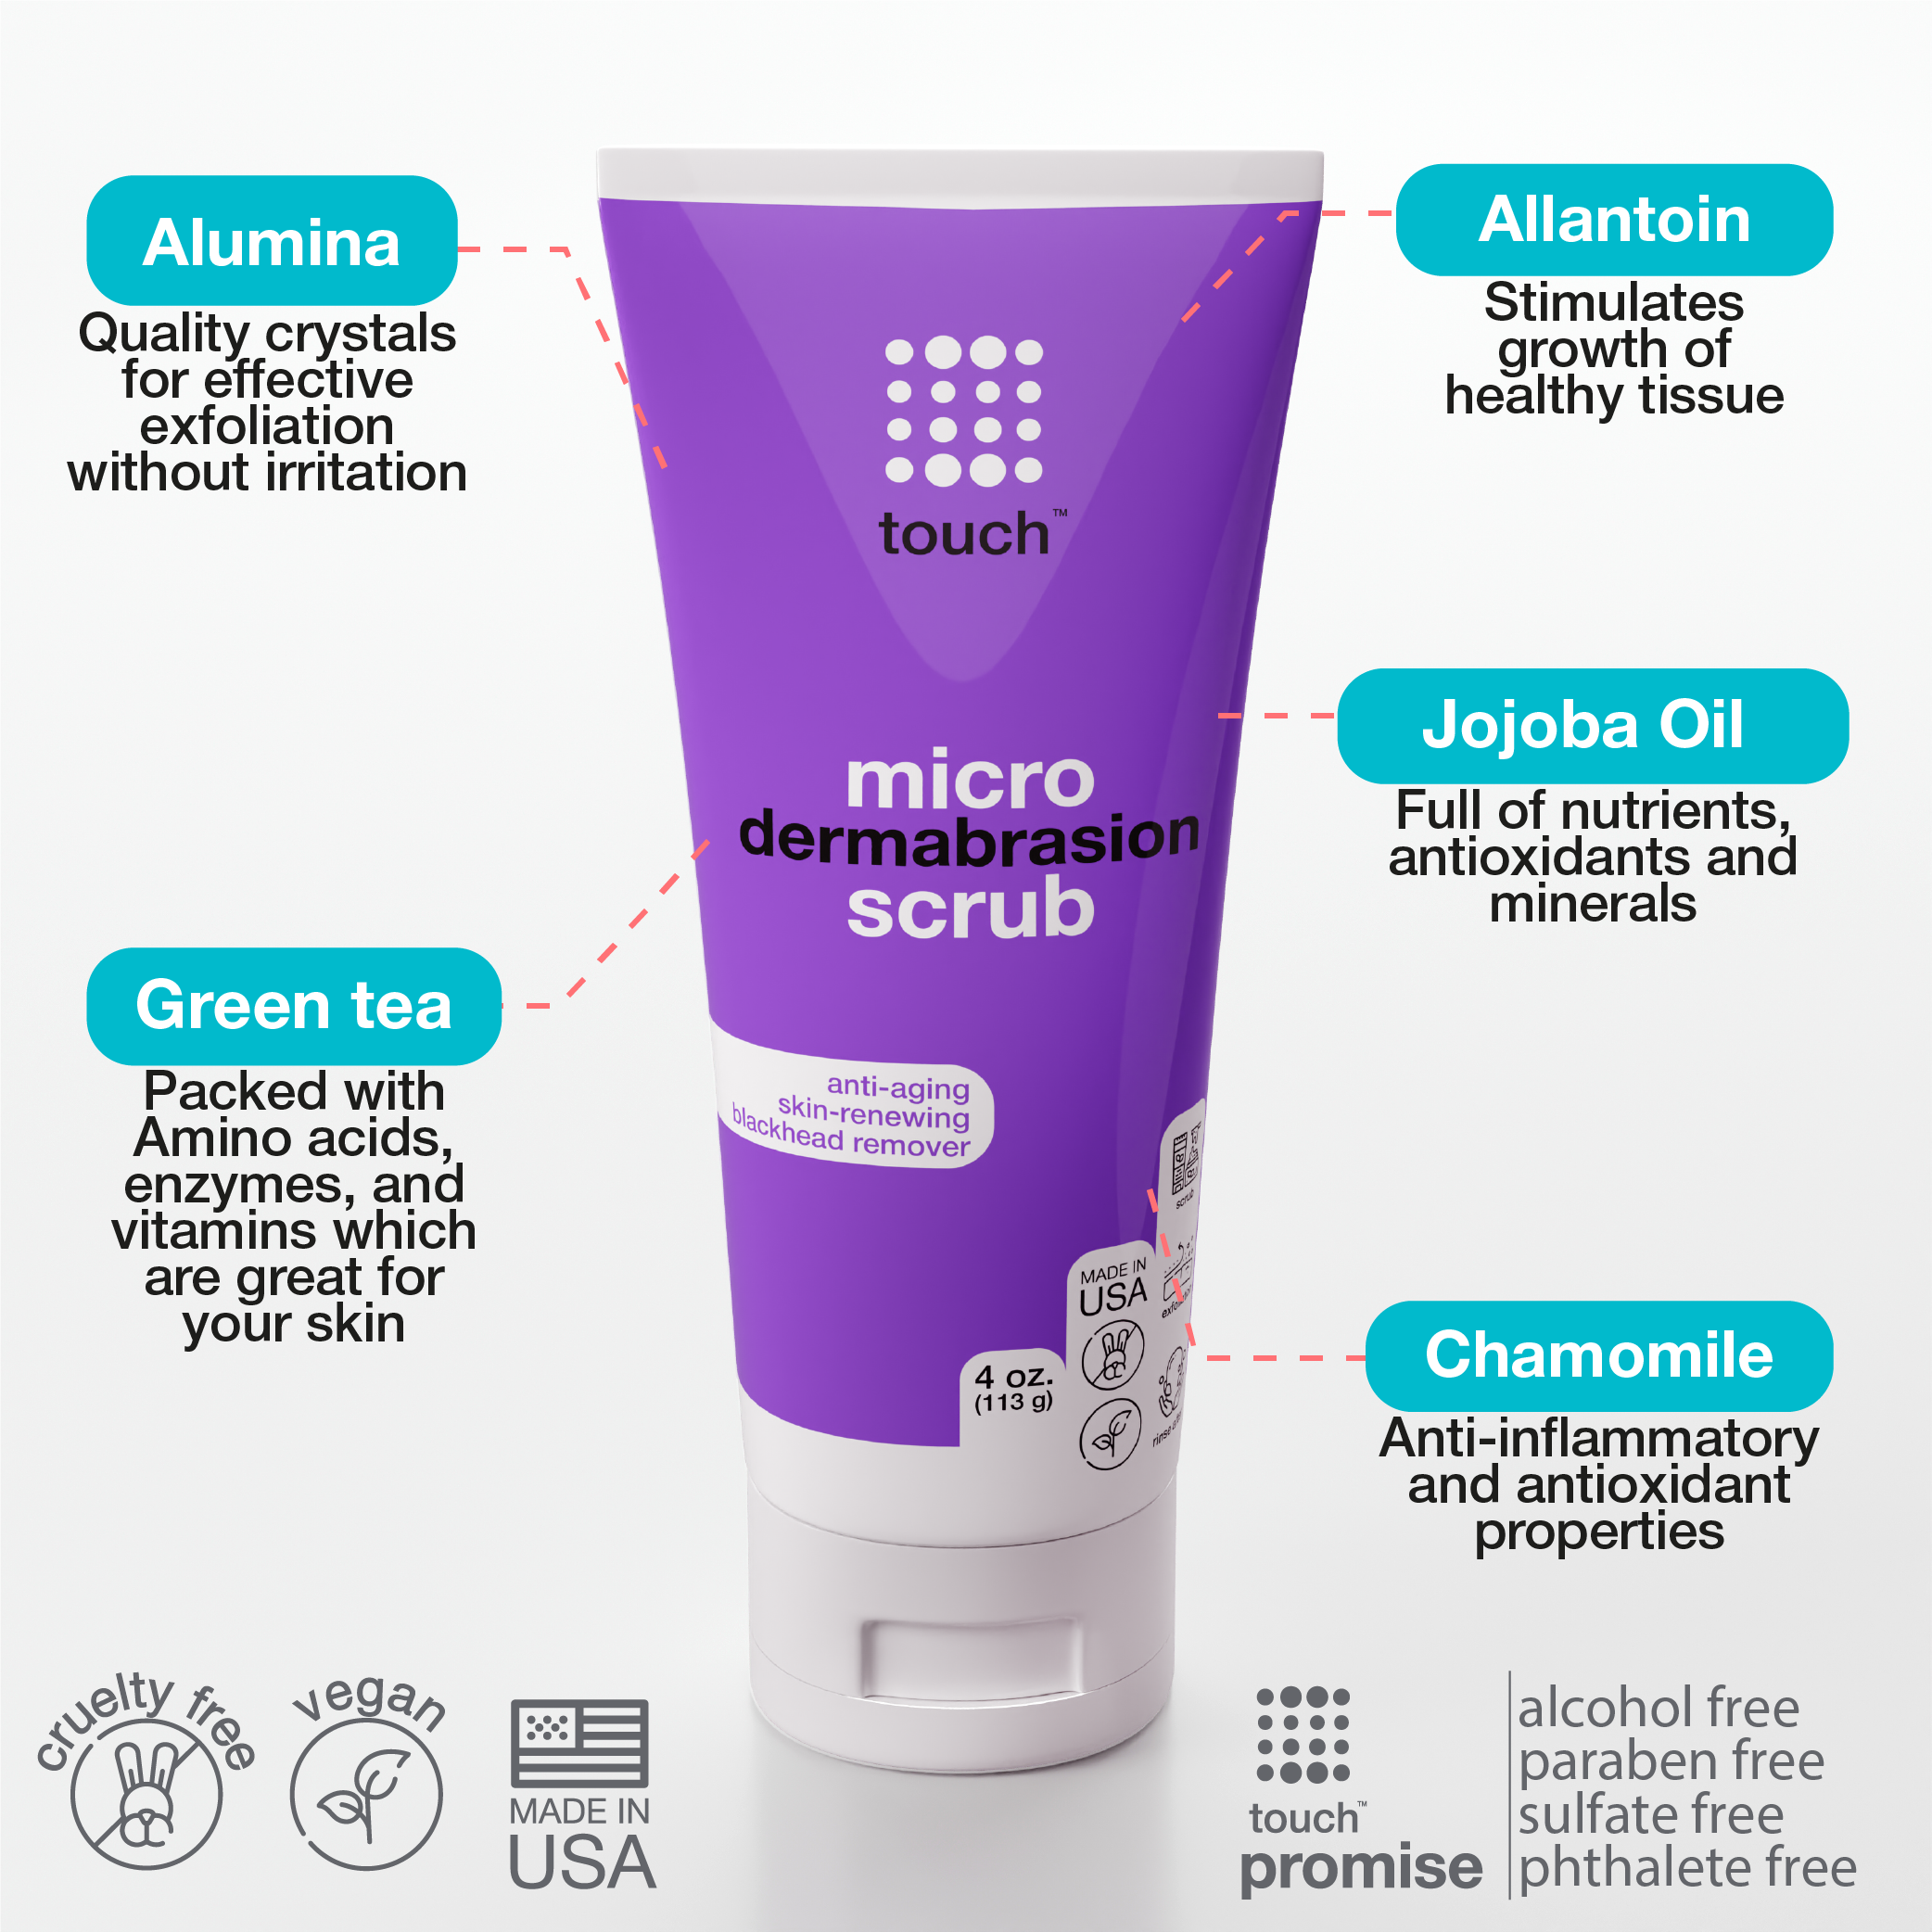 Microdermabrasion Facial Scrub and Face Exfoliator - Exfoliating Face Scrub Polish Cream with Dermatologist Crystals for Anti-Aging, Acne Scars, Dullness, Wrinkles, and Pores - Large 4 Ounce Size - image 3 of 7